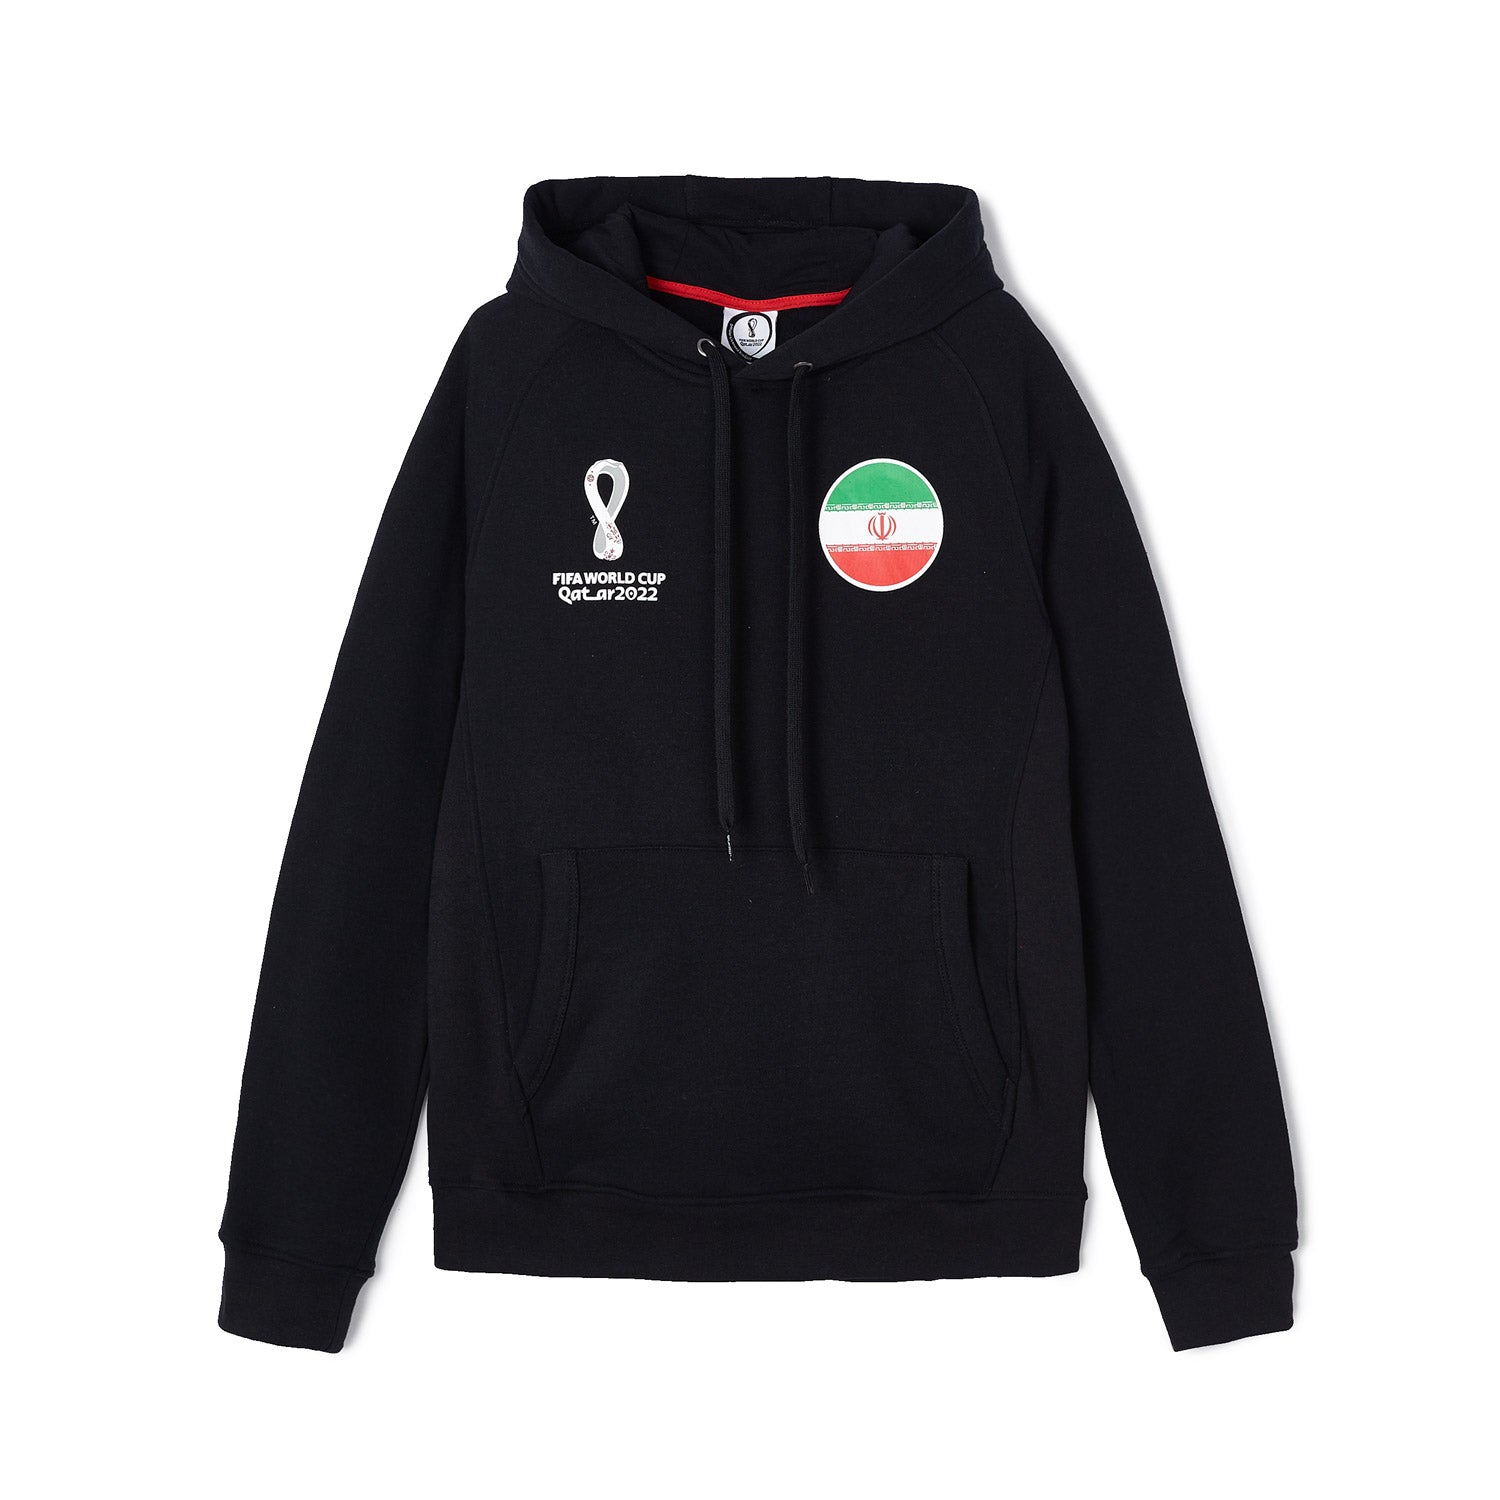 2022 World Cup Iran Black Hoodie - Men's - Official FIFA Store